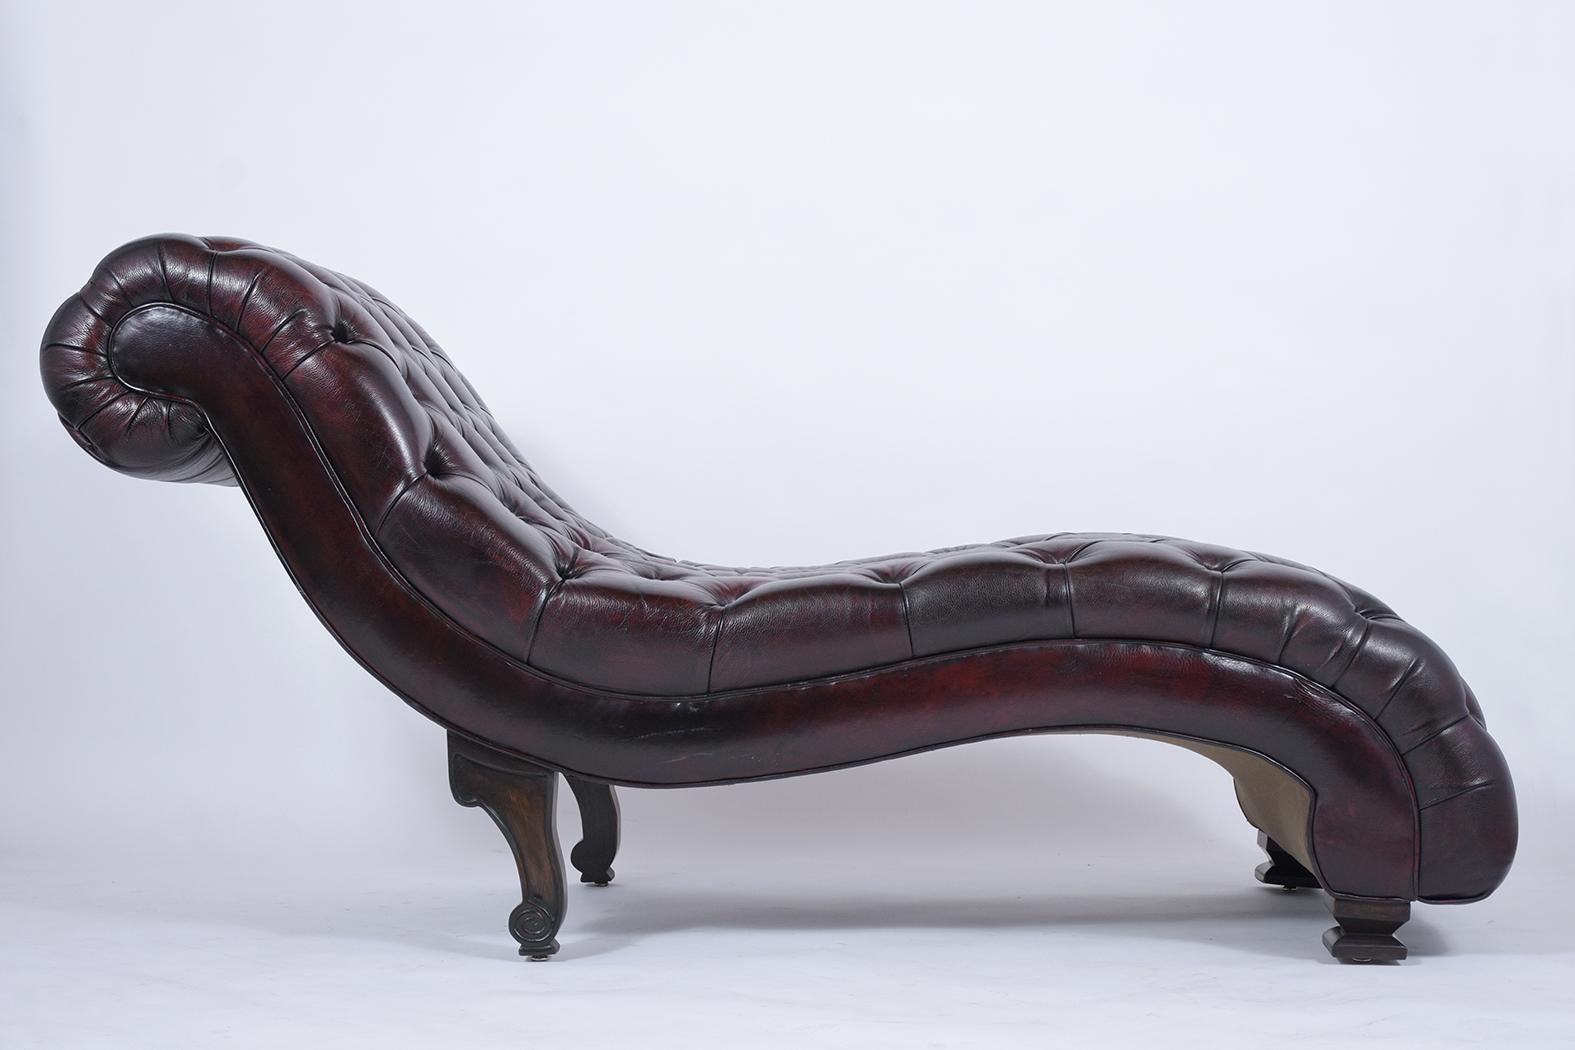 Stained Vintage Tufted Chaise Lounge